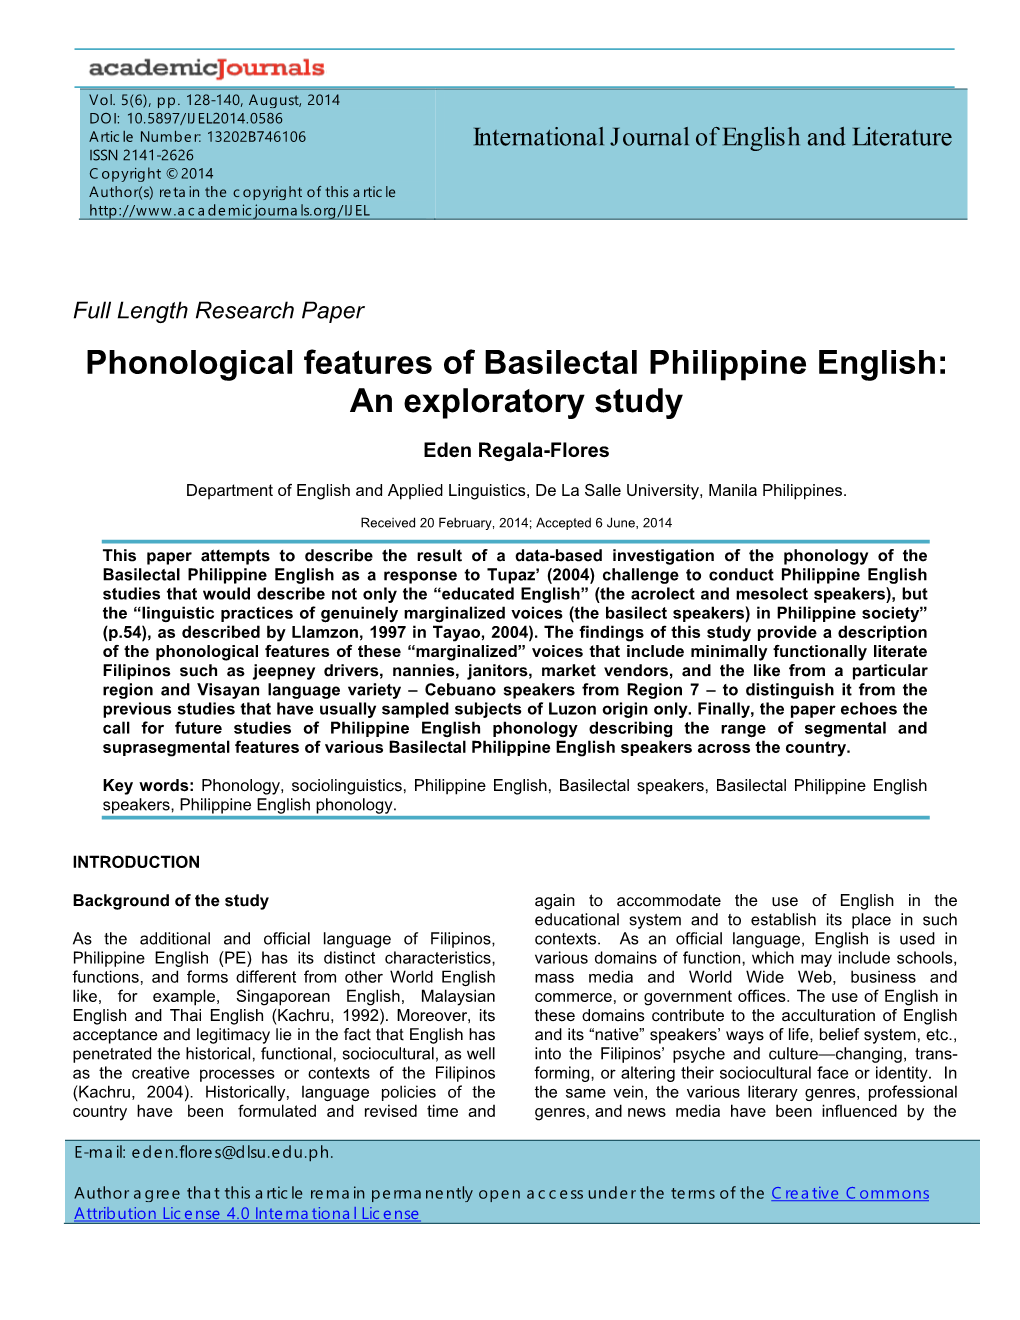 Phonological Features of Basilectal Philippine English: an Exploratory Study